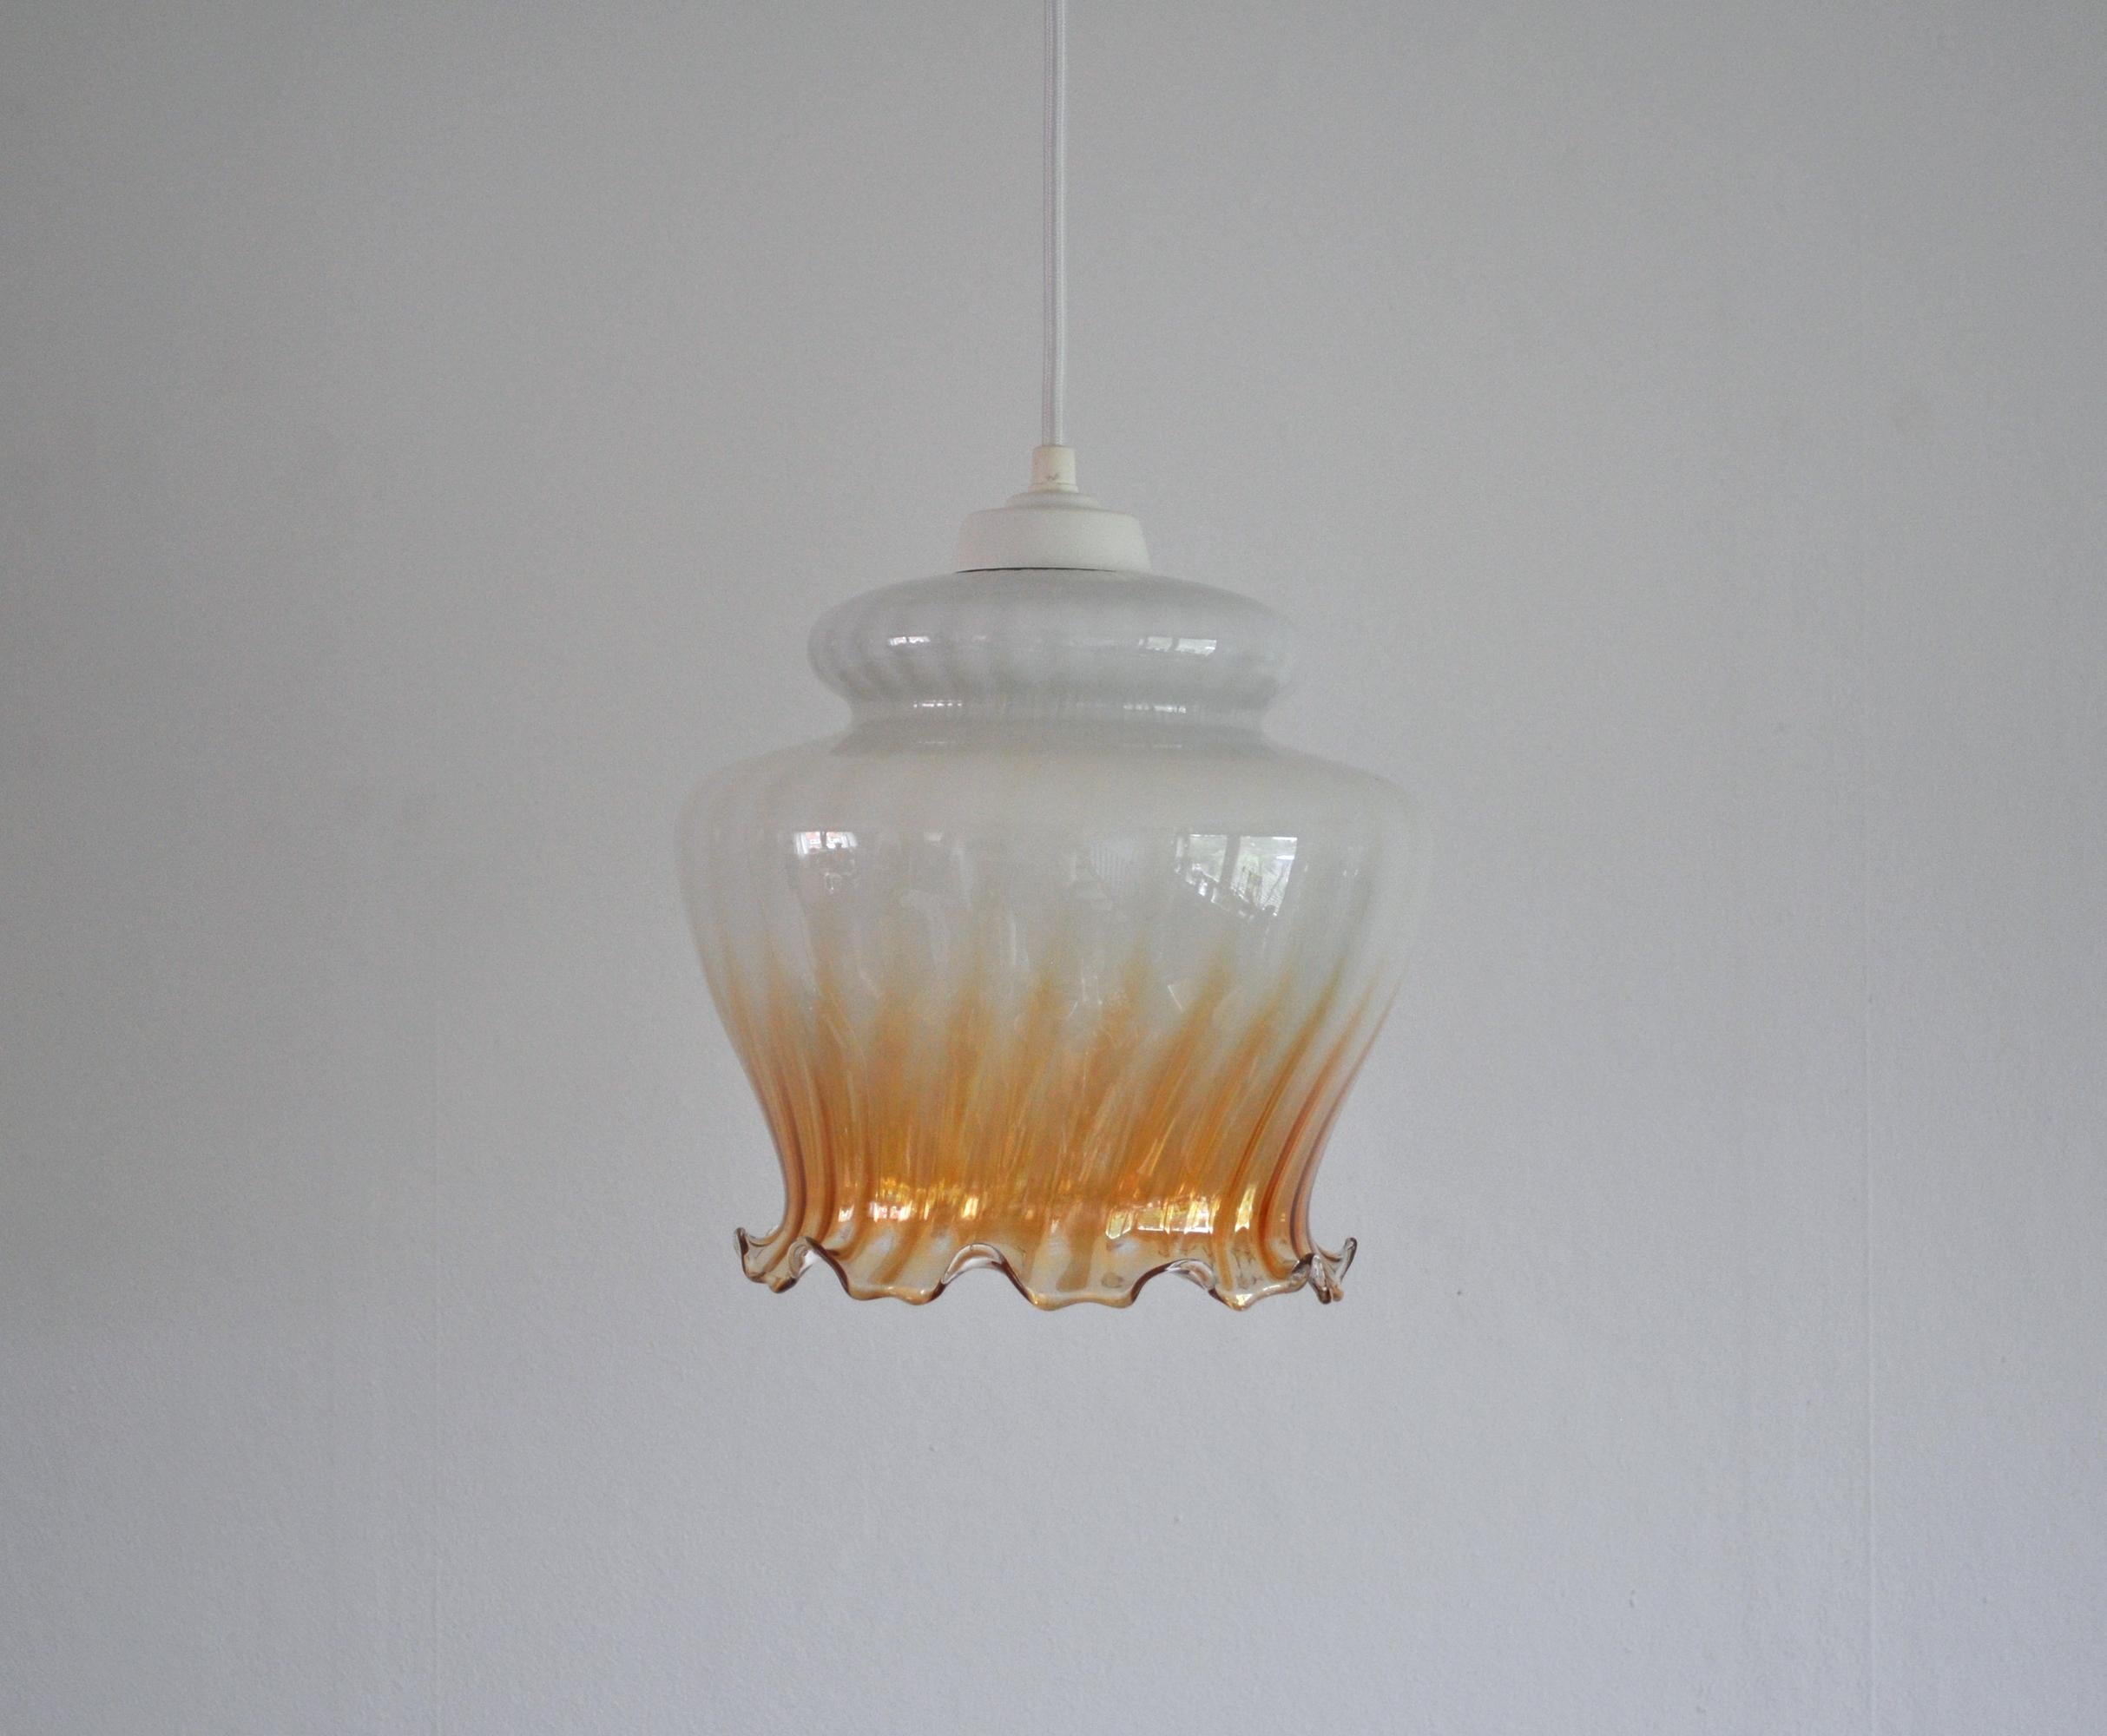 Glass pendant with decorative rim in Art Nouveau style. 
Probably made in Denmark.
Rewired with fabric cord. 
Diameter 22 cm, height 23 cm 
Light source: E27 Edison screw bulb.